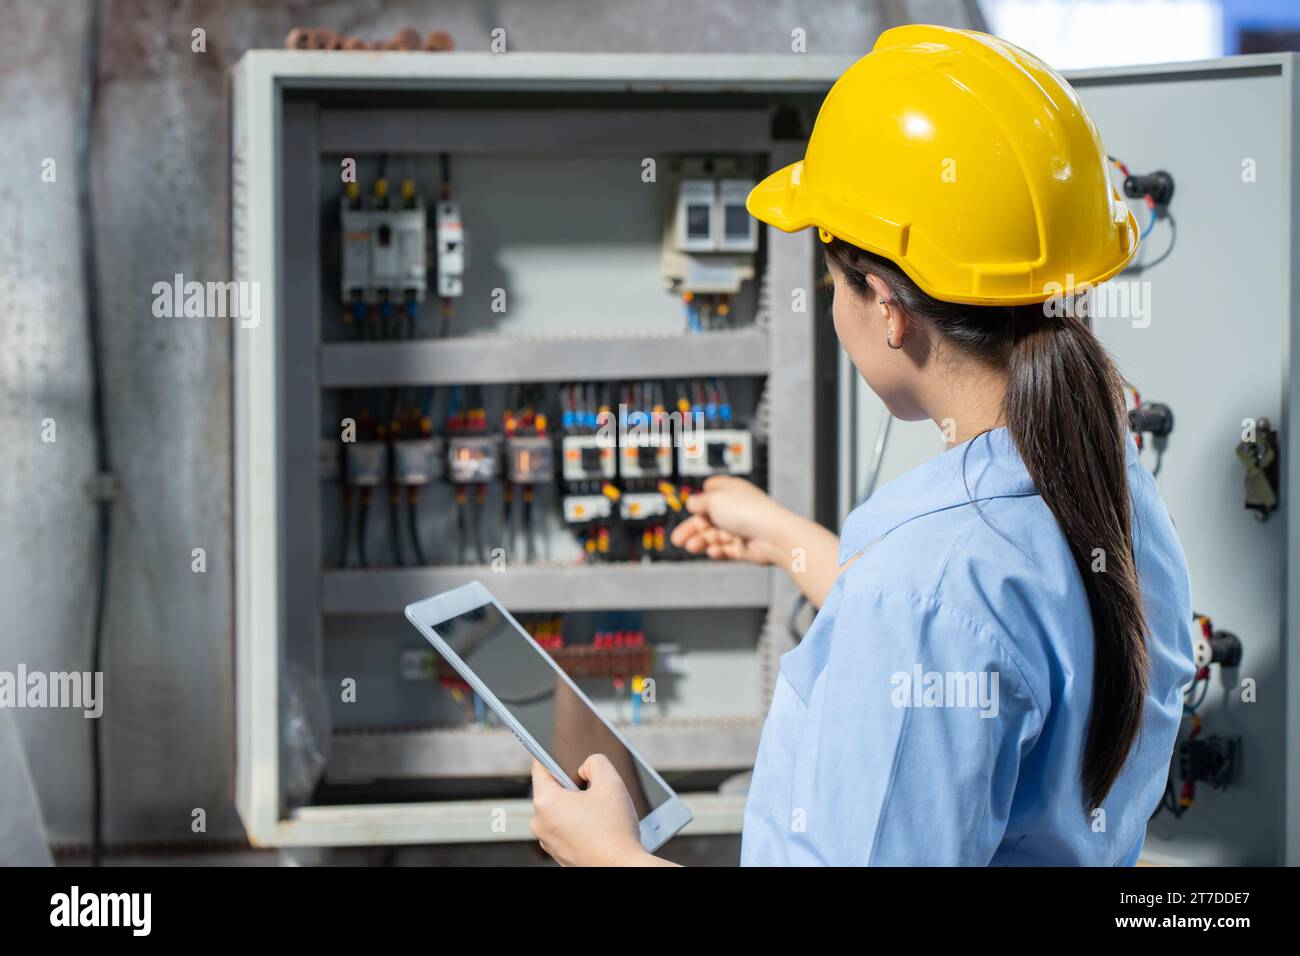 Electrician Engineer woman working check service maintenance electricity main circuit fuse and power system in industry factory Stock Photo